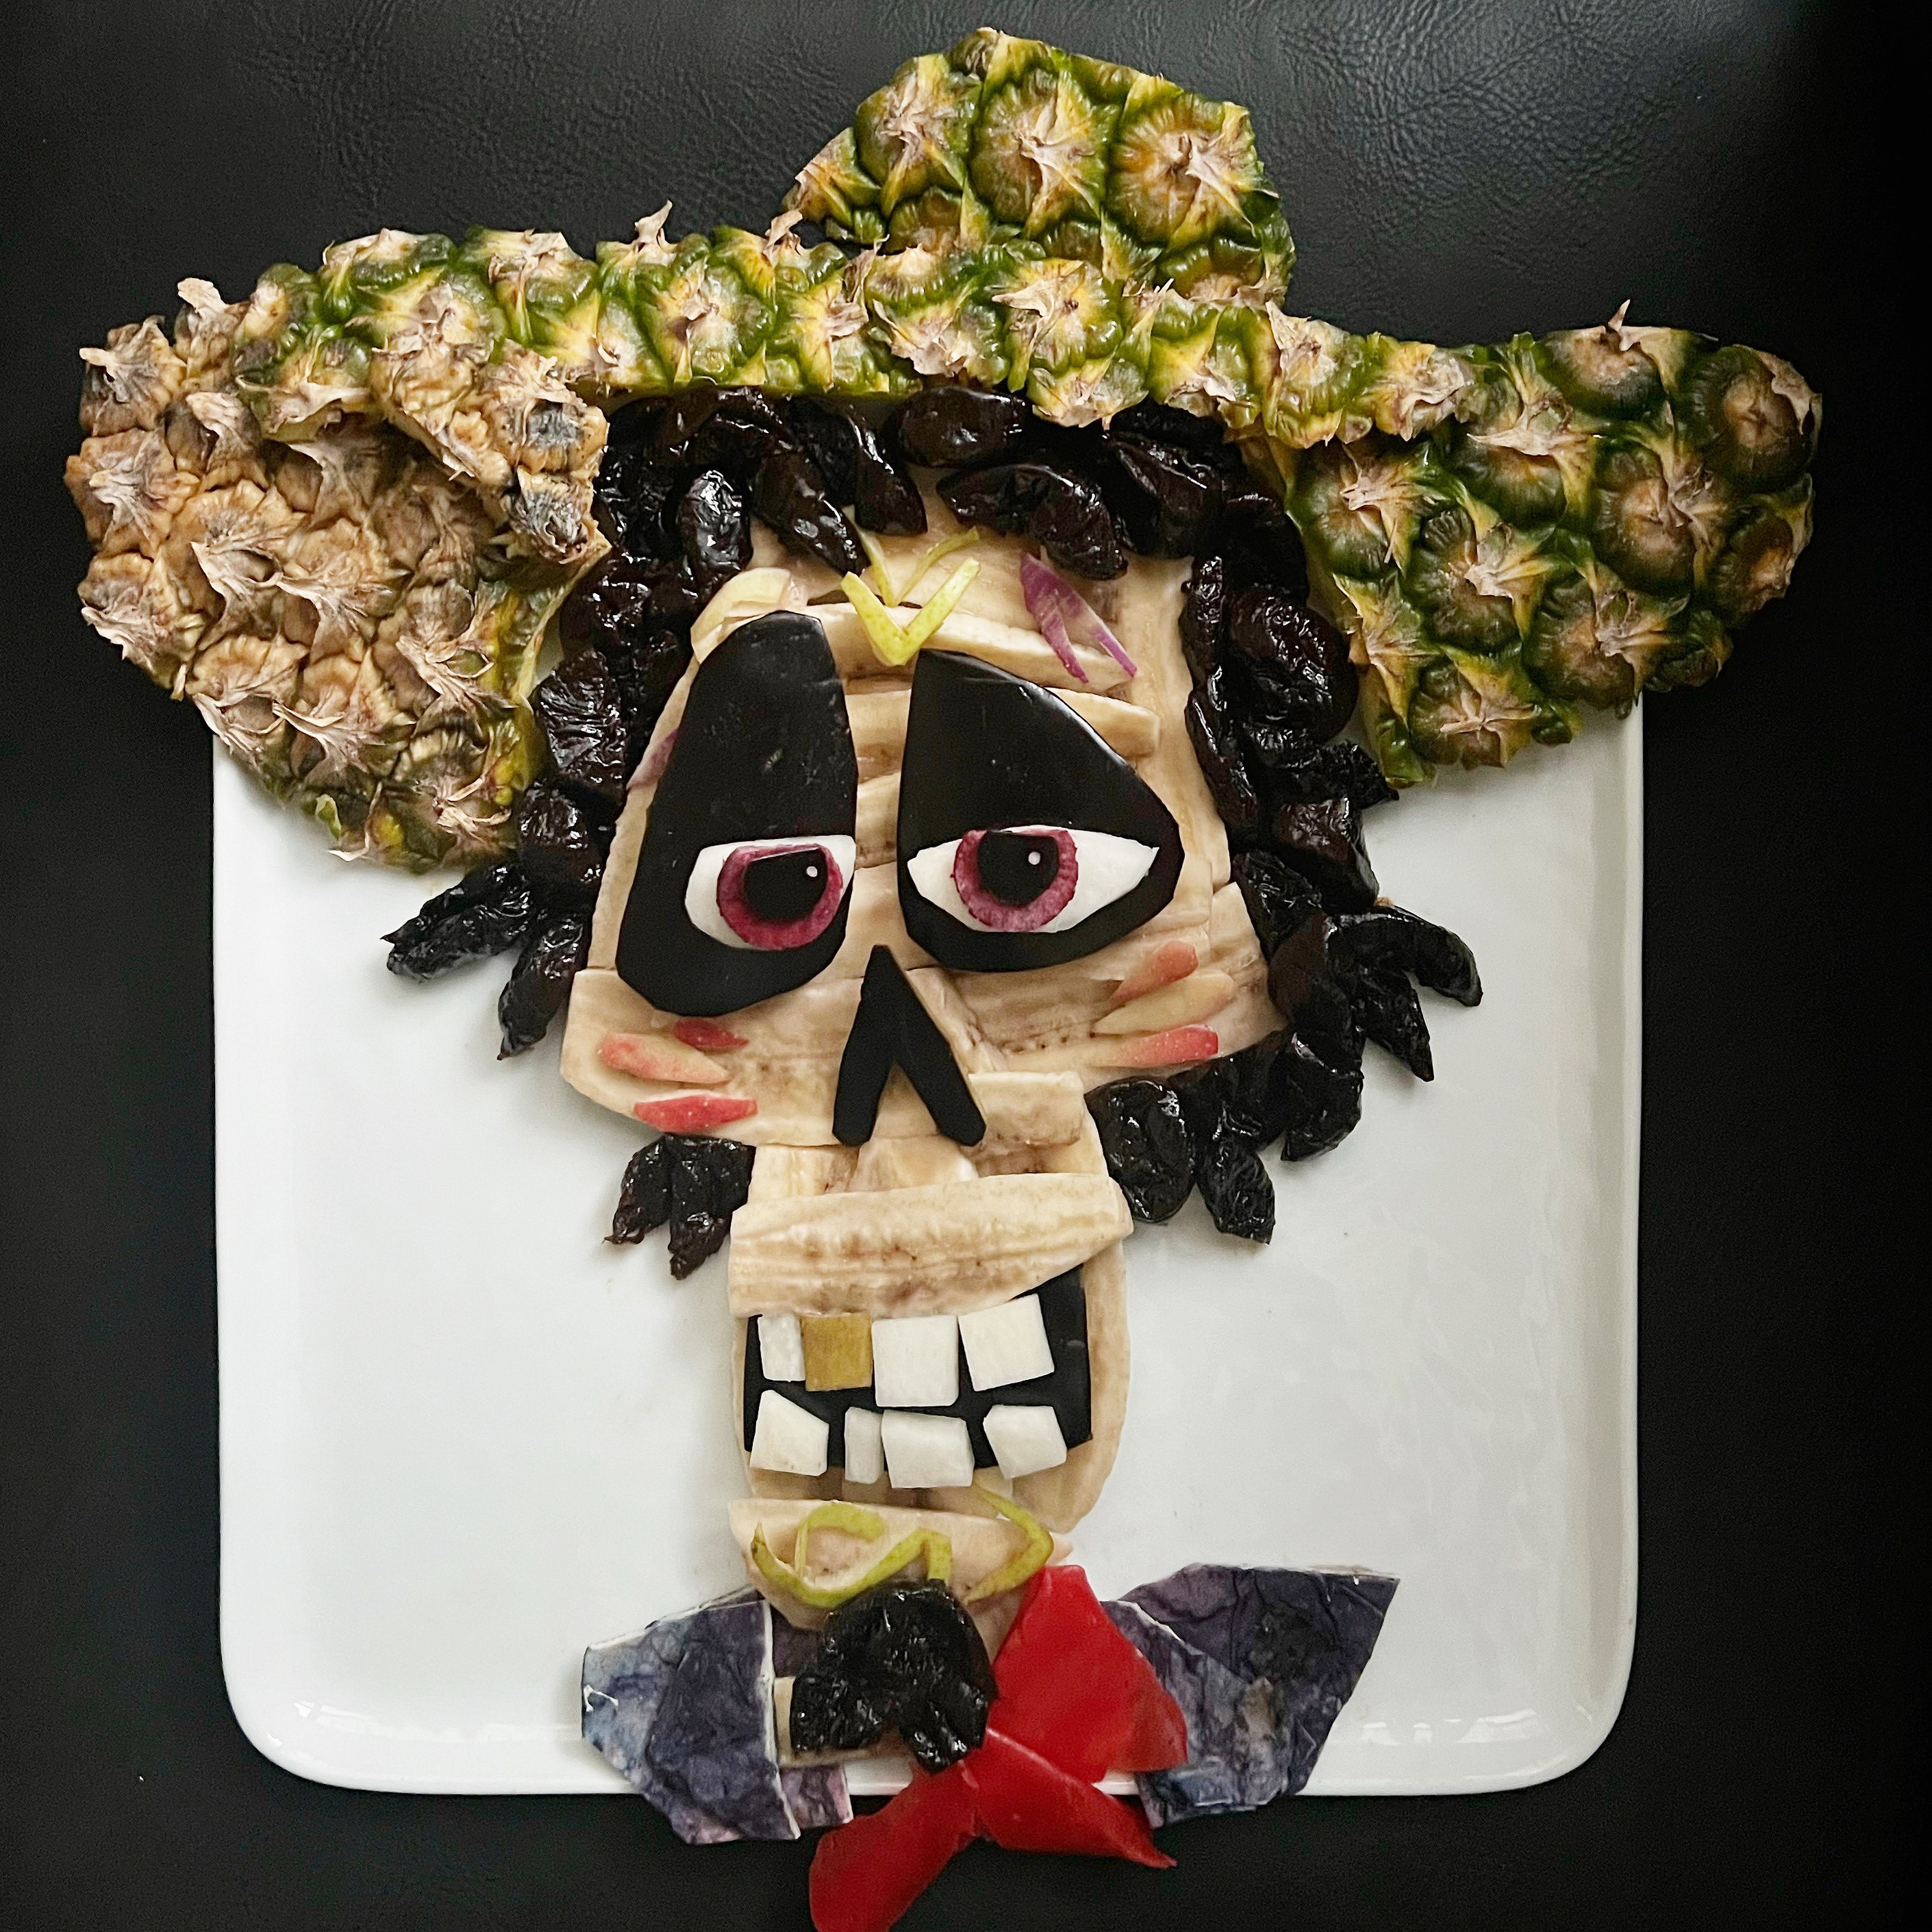 Hector from Pixar's Coco, food art by Harley Langberg